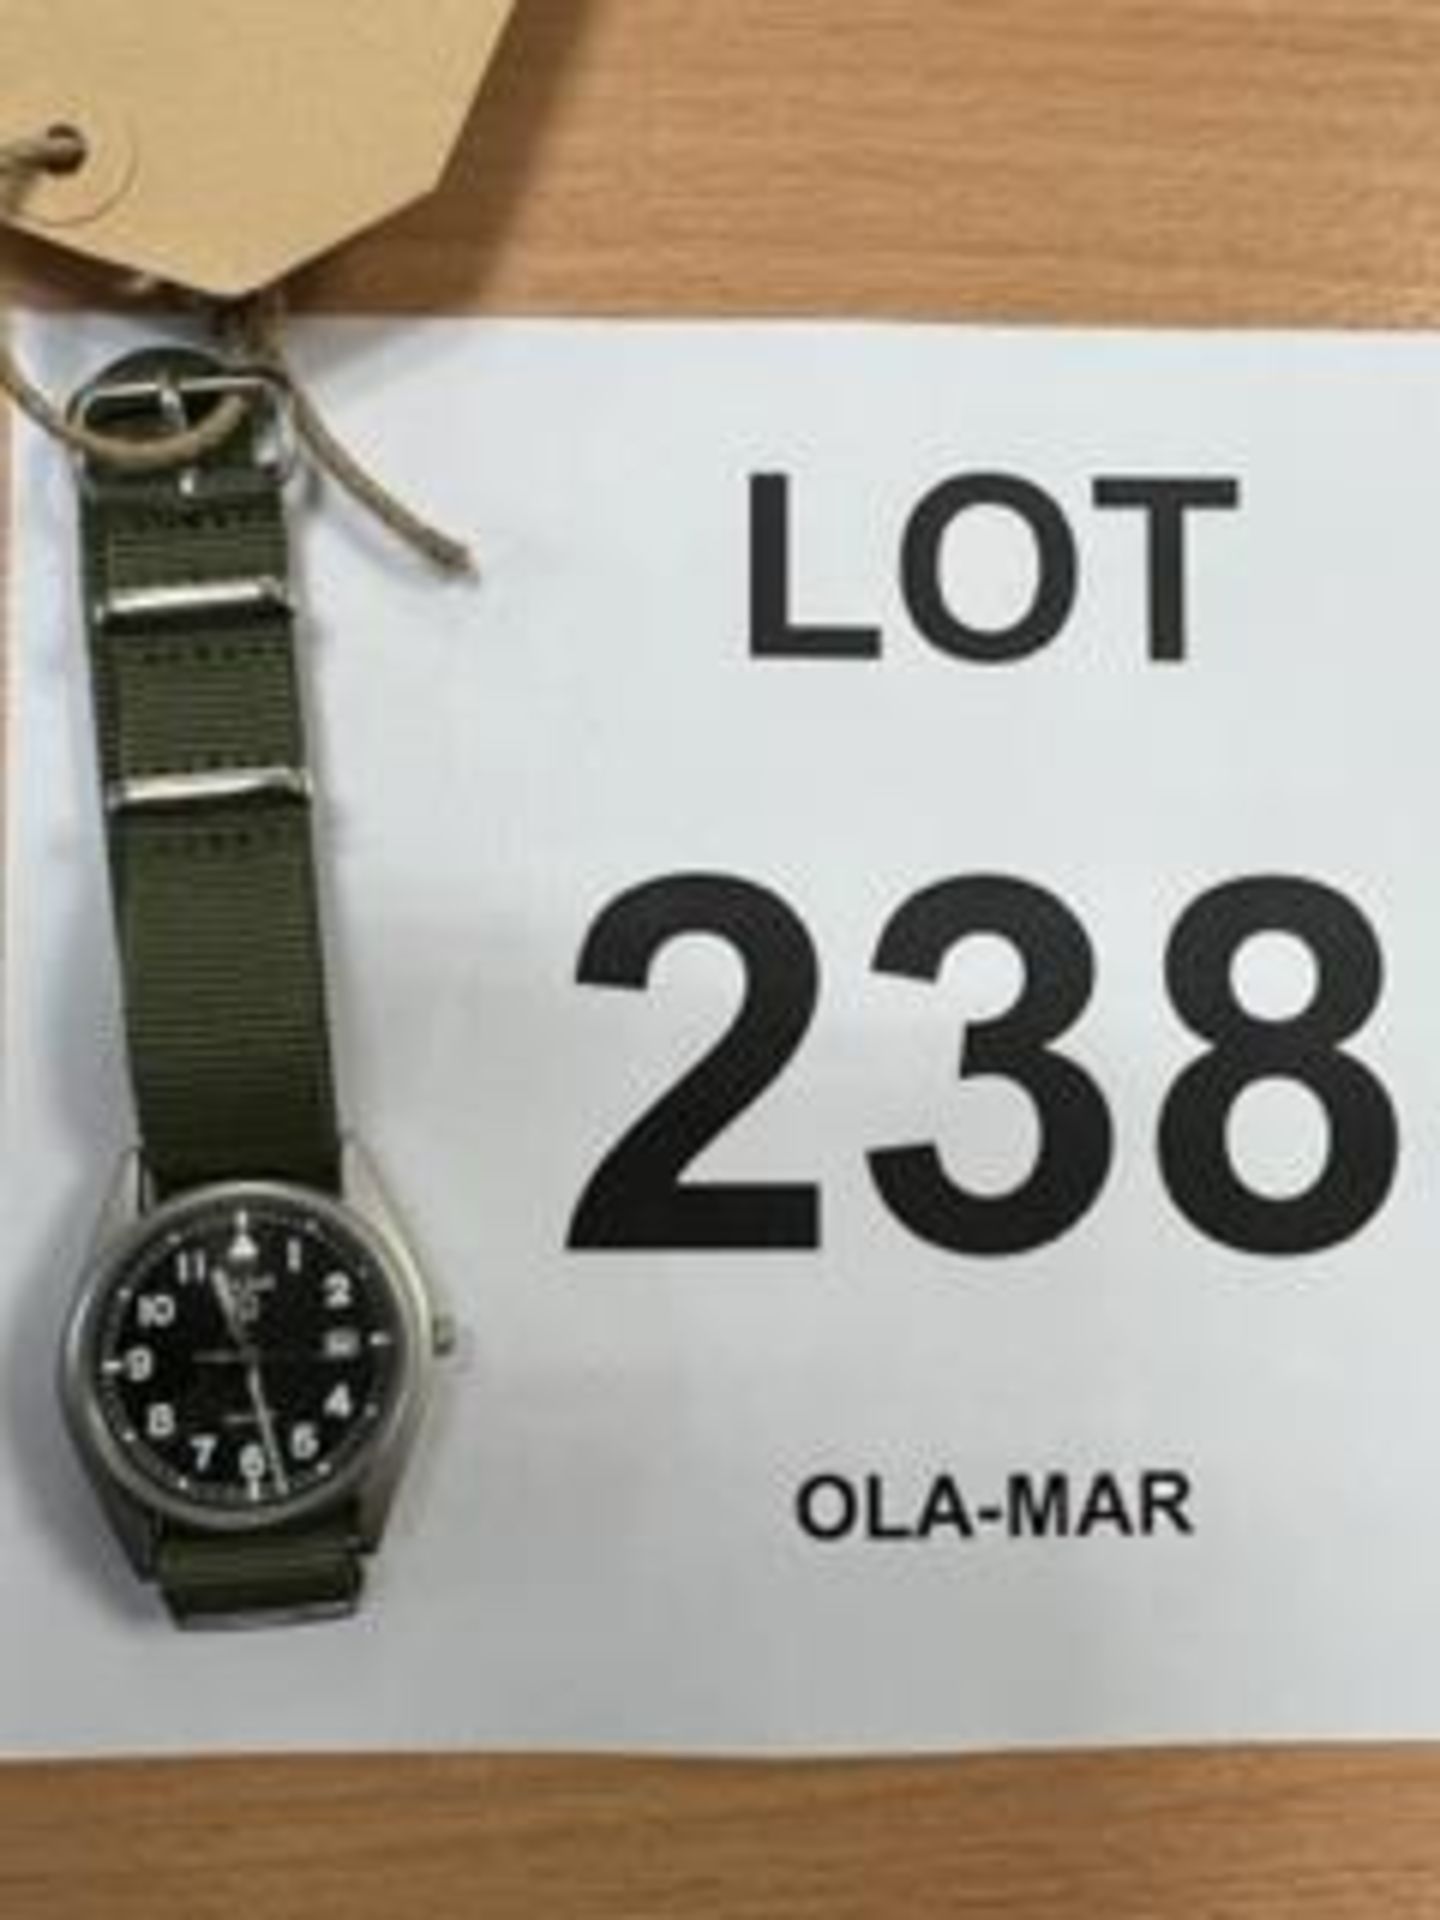 PULSAR BRITISH ARMY W10 SERVICE WATCH WATER RESISTANT NATO MARKS DATE 2004 - Image 6 of 6